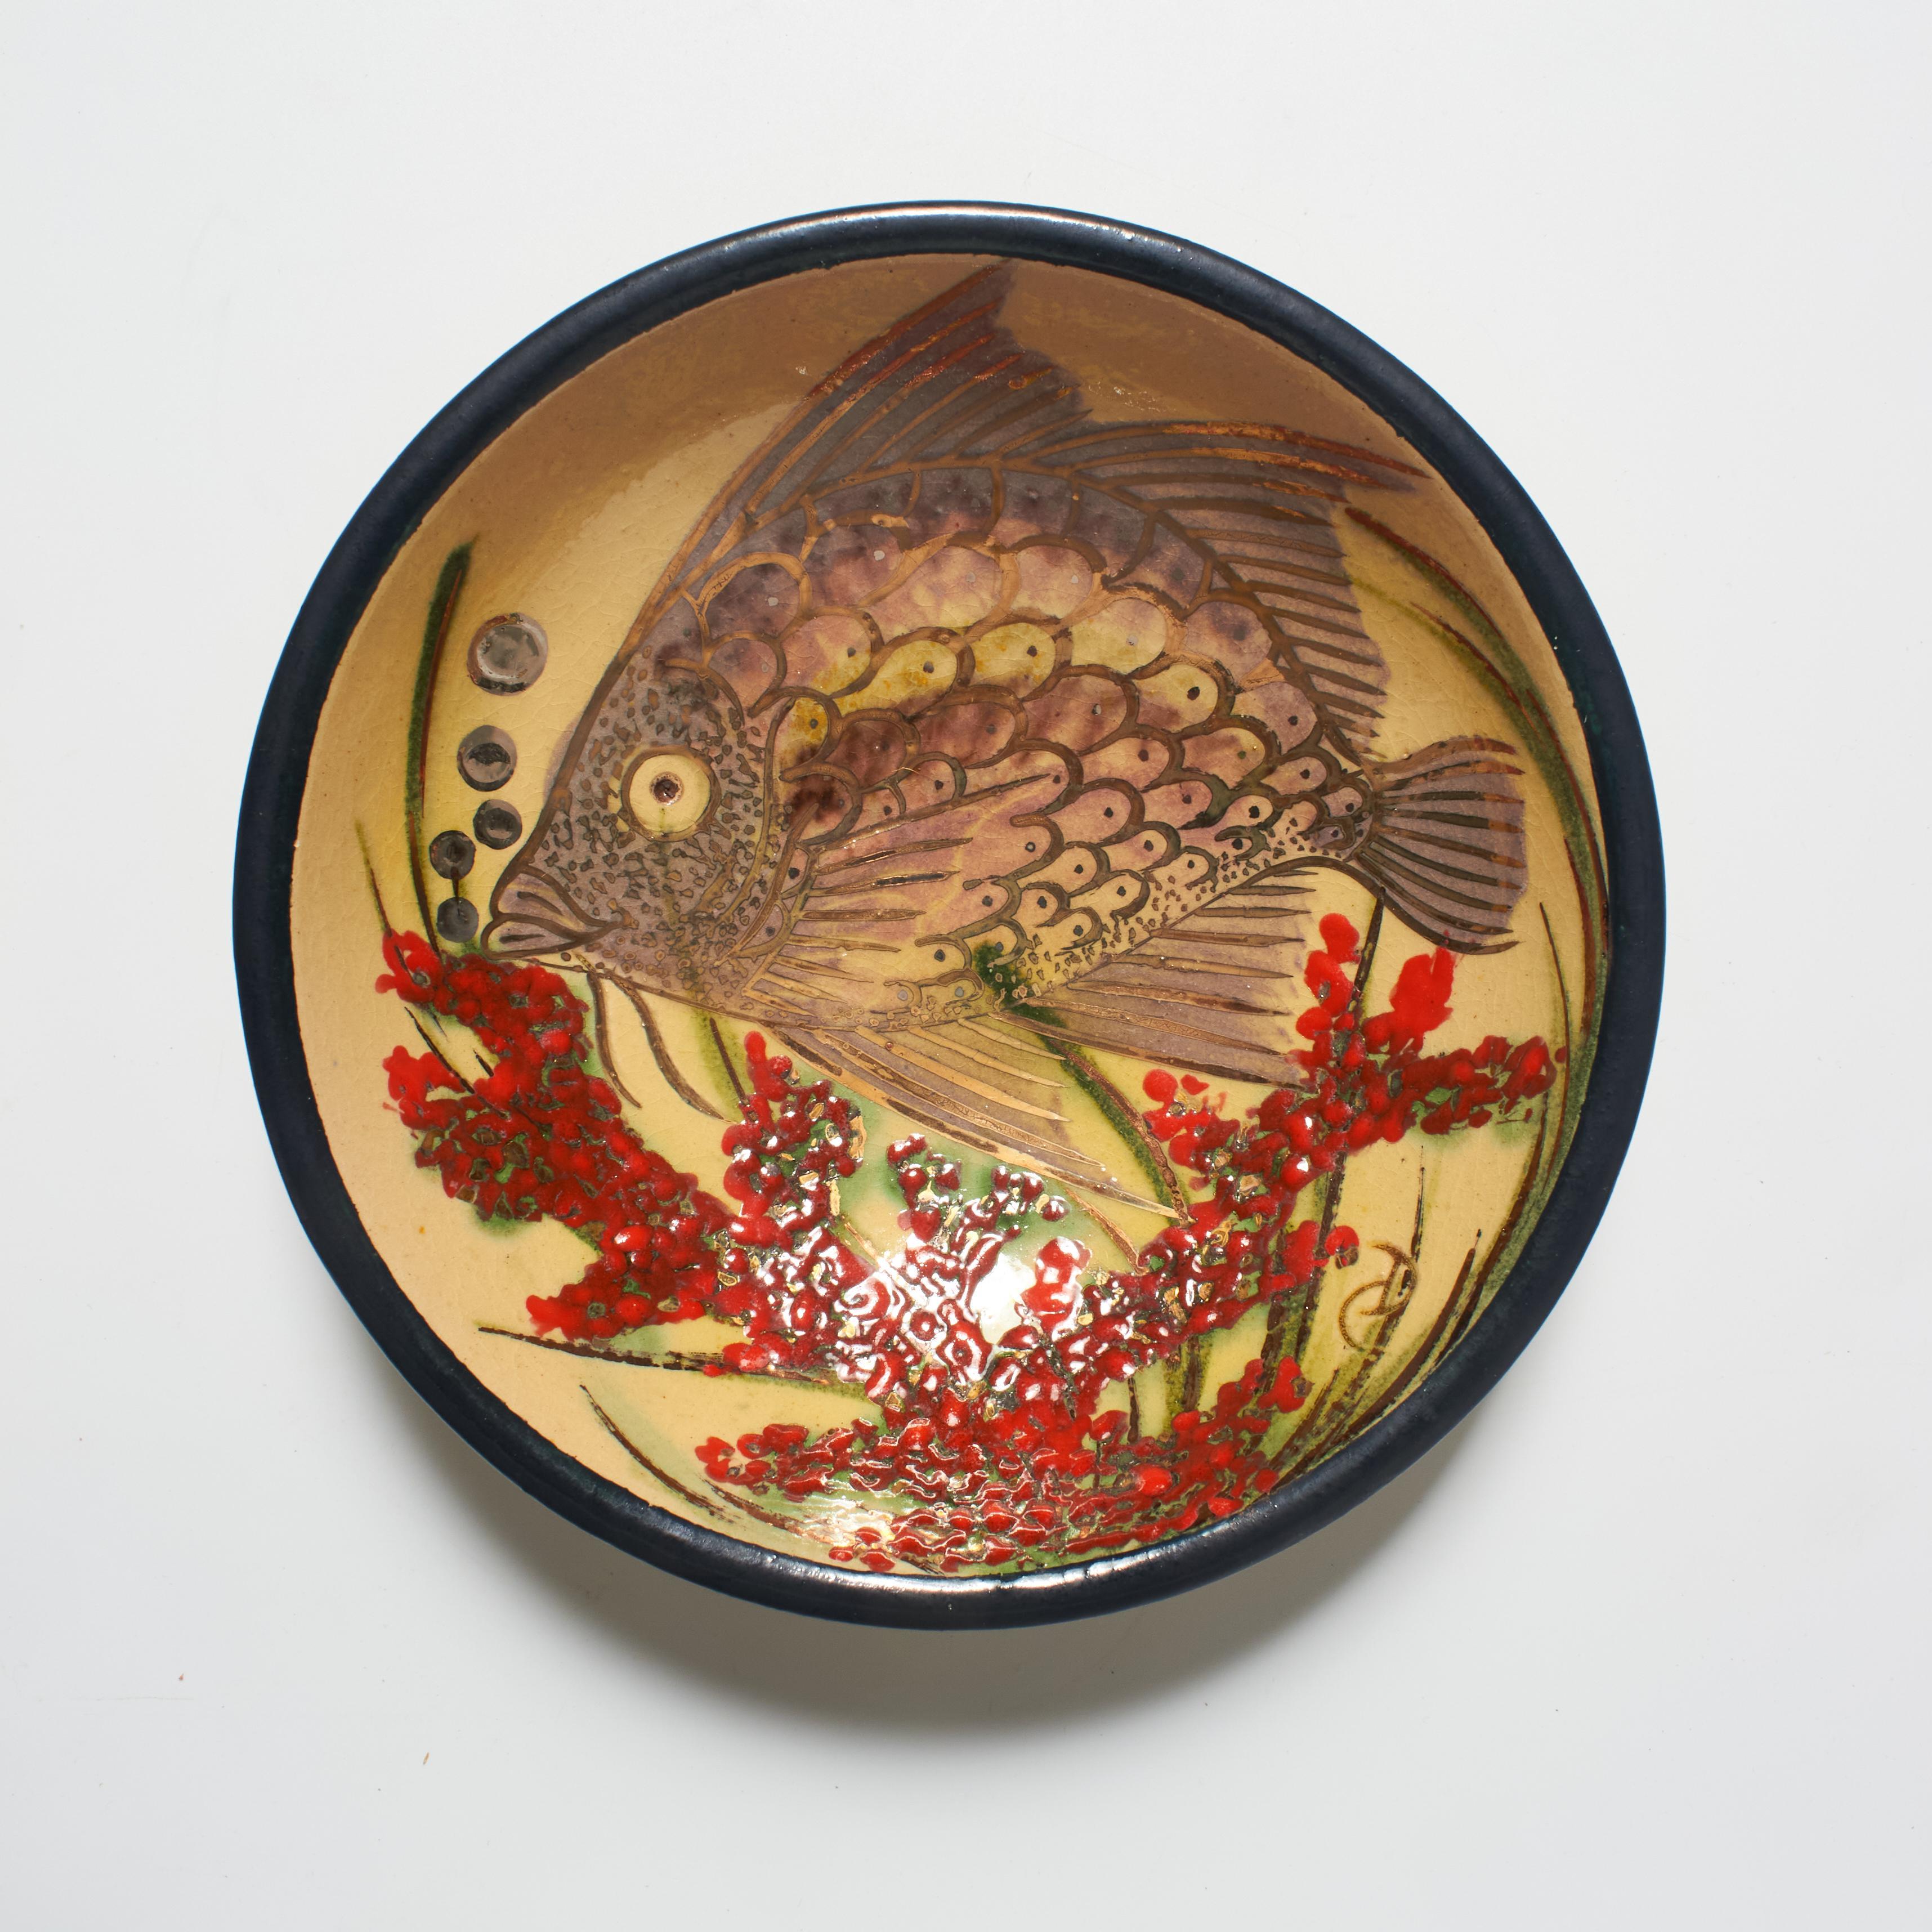 Pair of Vintage Hand-Painted Ceramic Plates by Catalan Artist Diaz Costa In Good Condition For Sale In Barcelona, ES